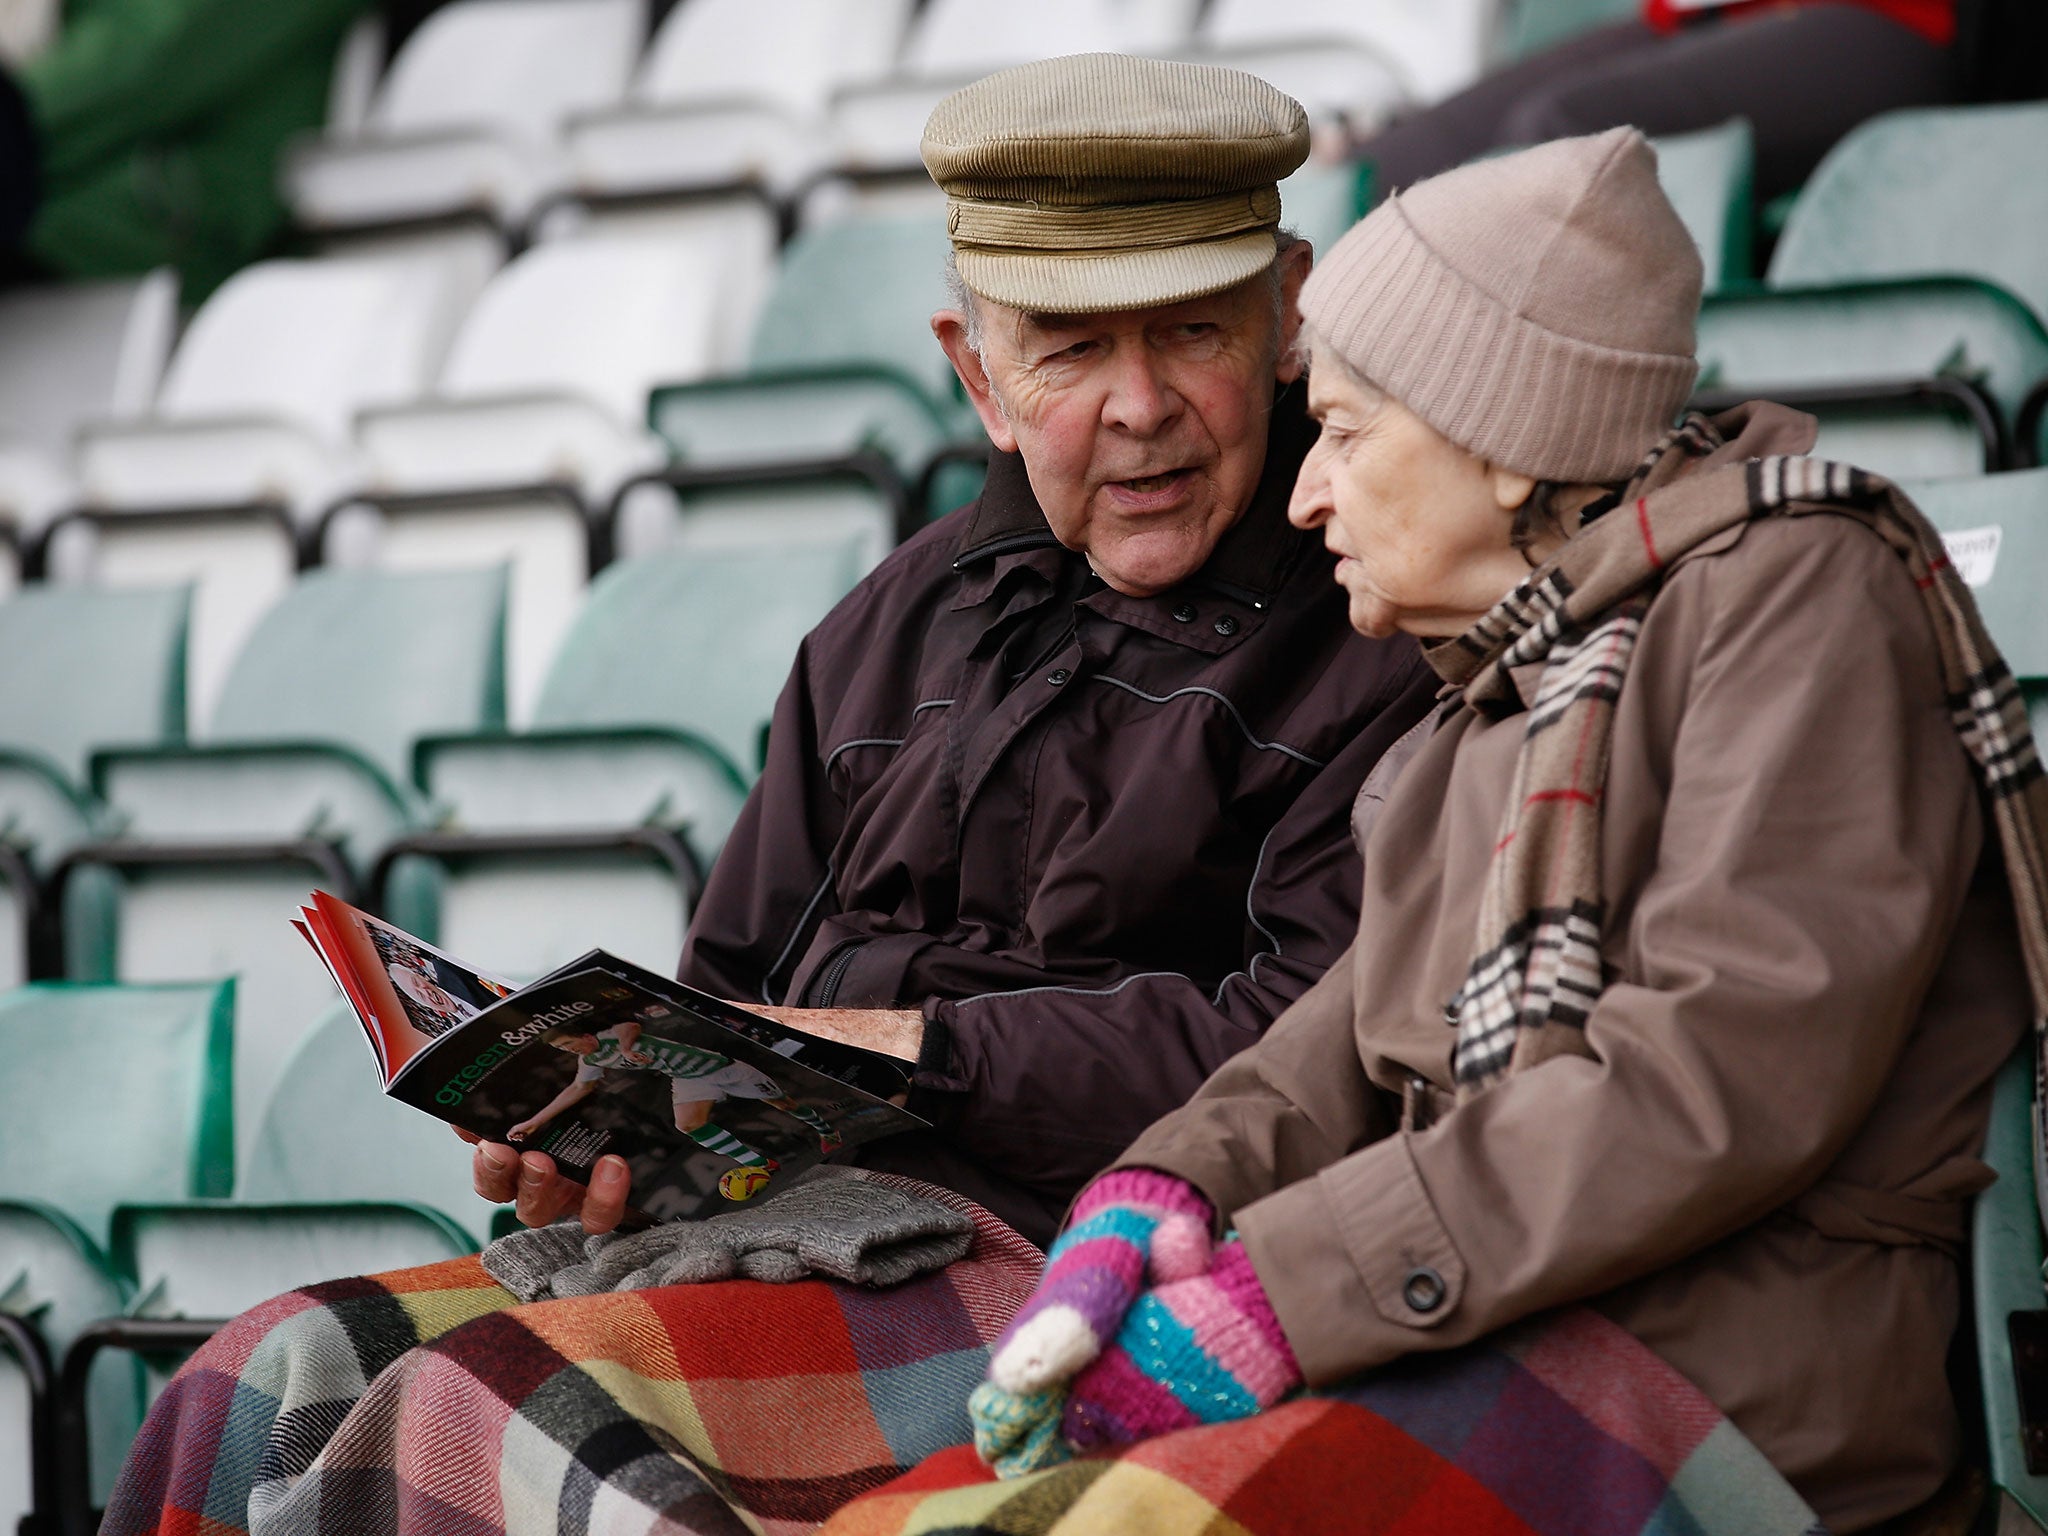 Two elderly spectators at a football match.